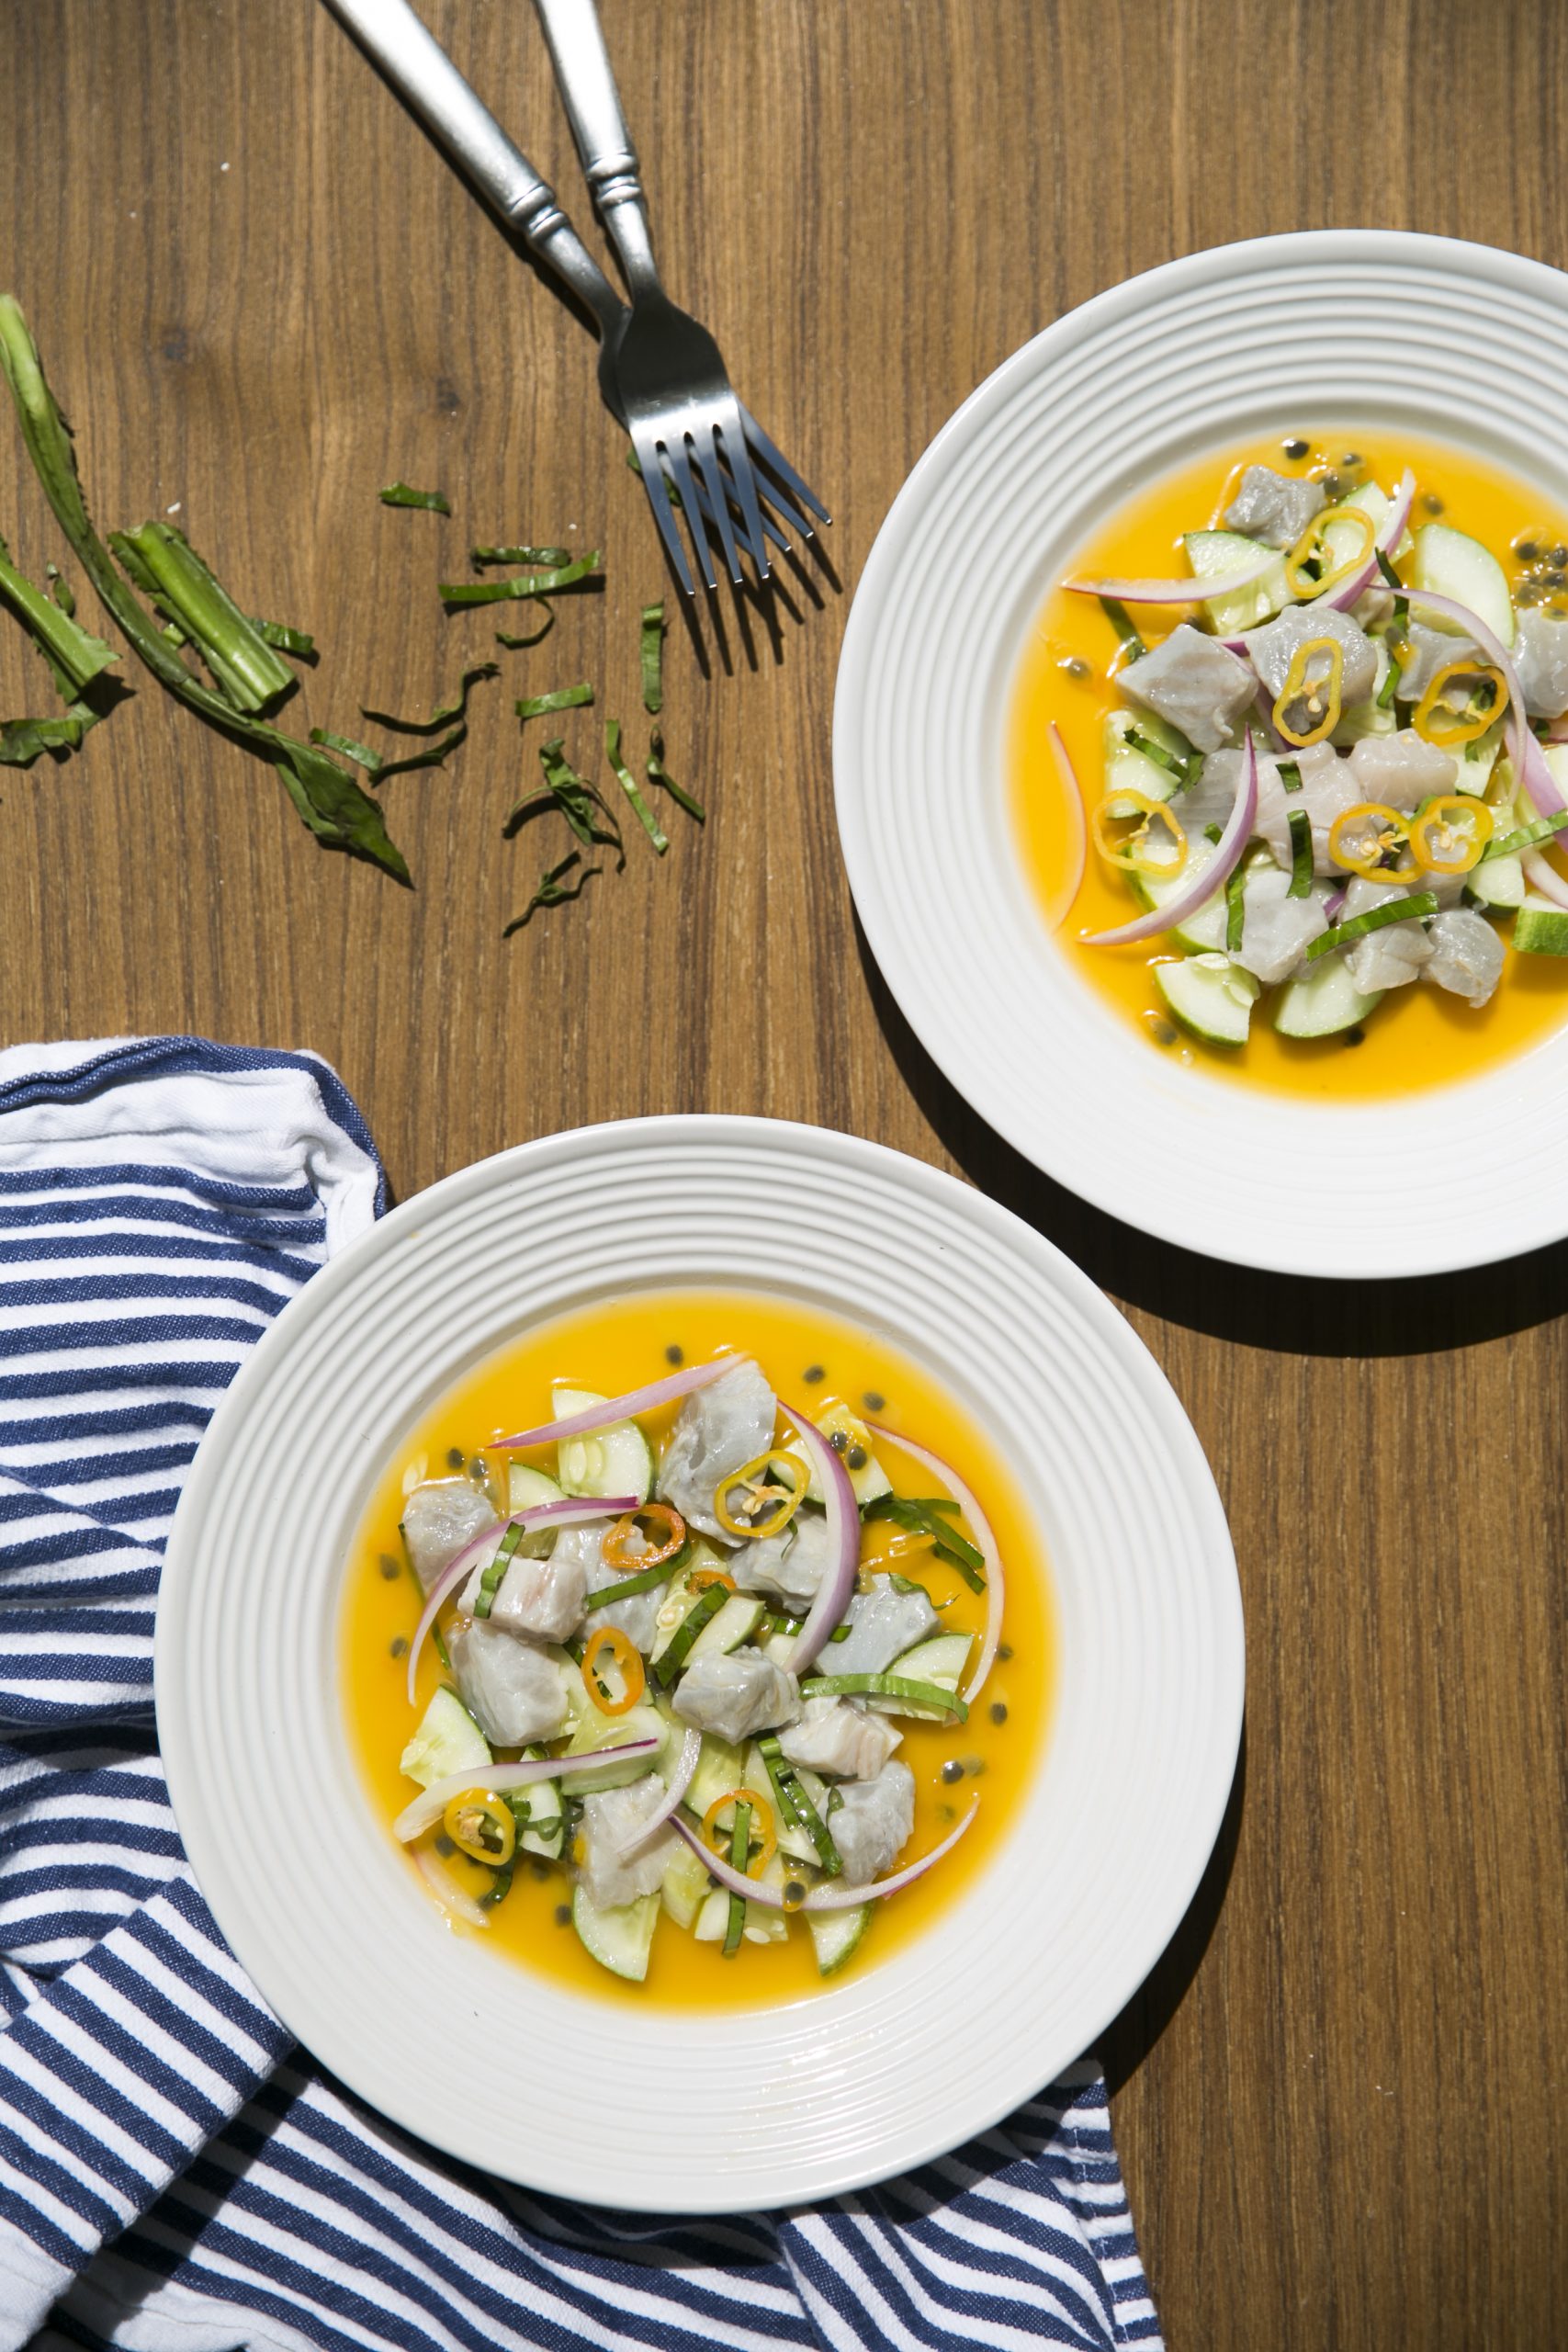 Add a Dash of Passion Fruit to Your Ceviche